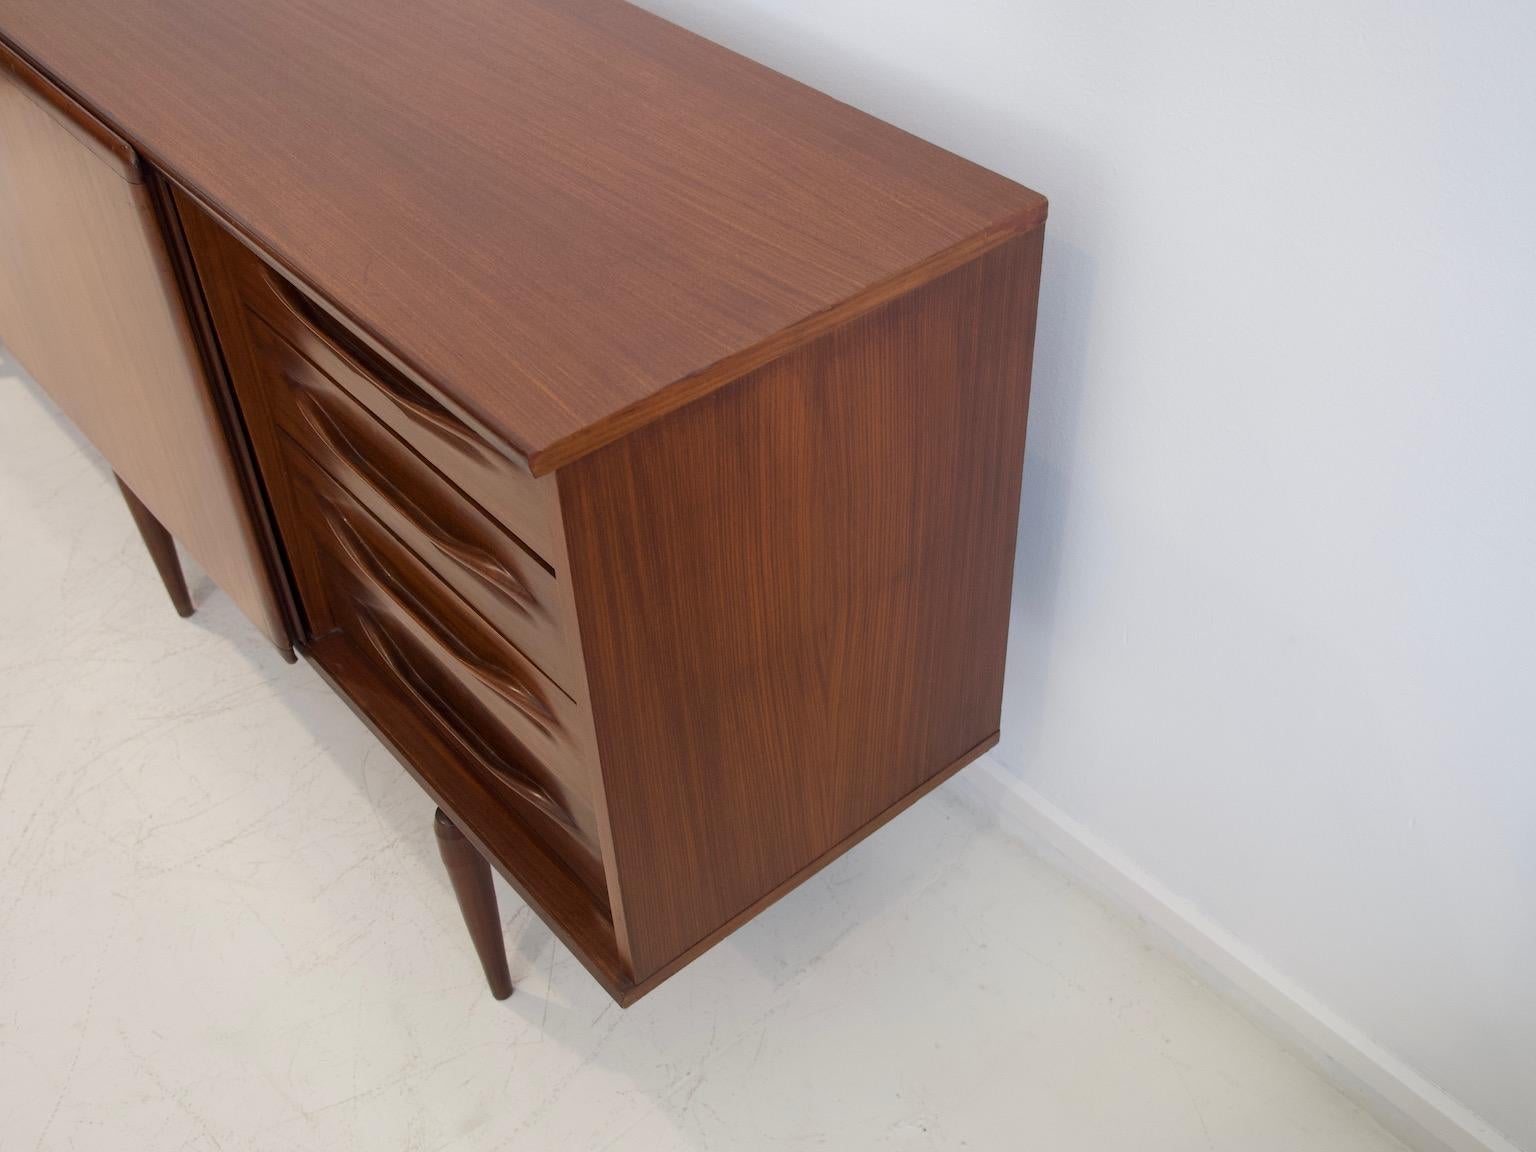 Teak Sideboard with Sliding Doors and Drawers by Amma 6